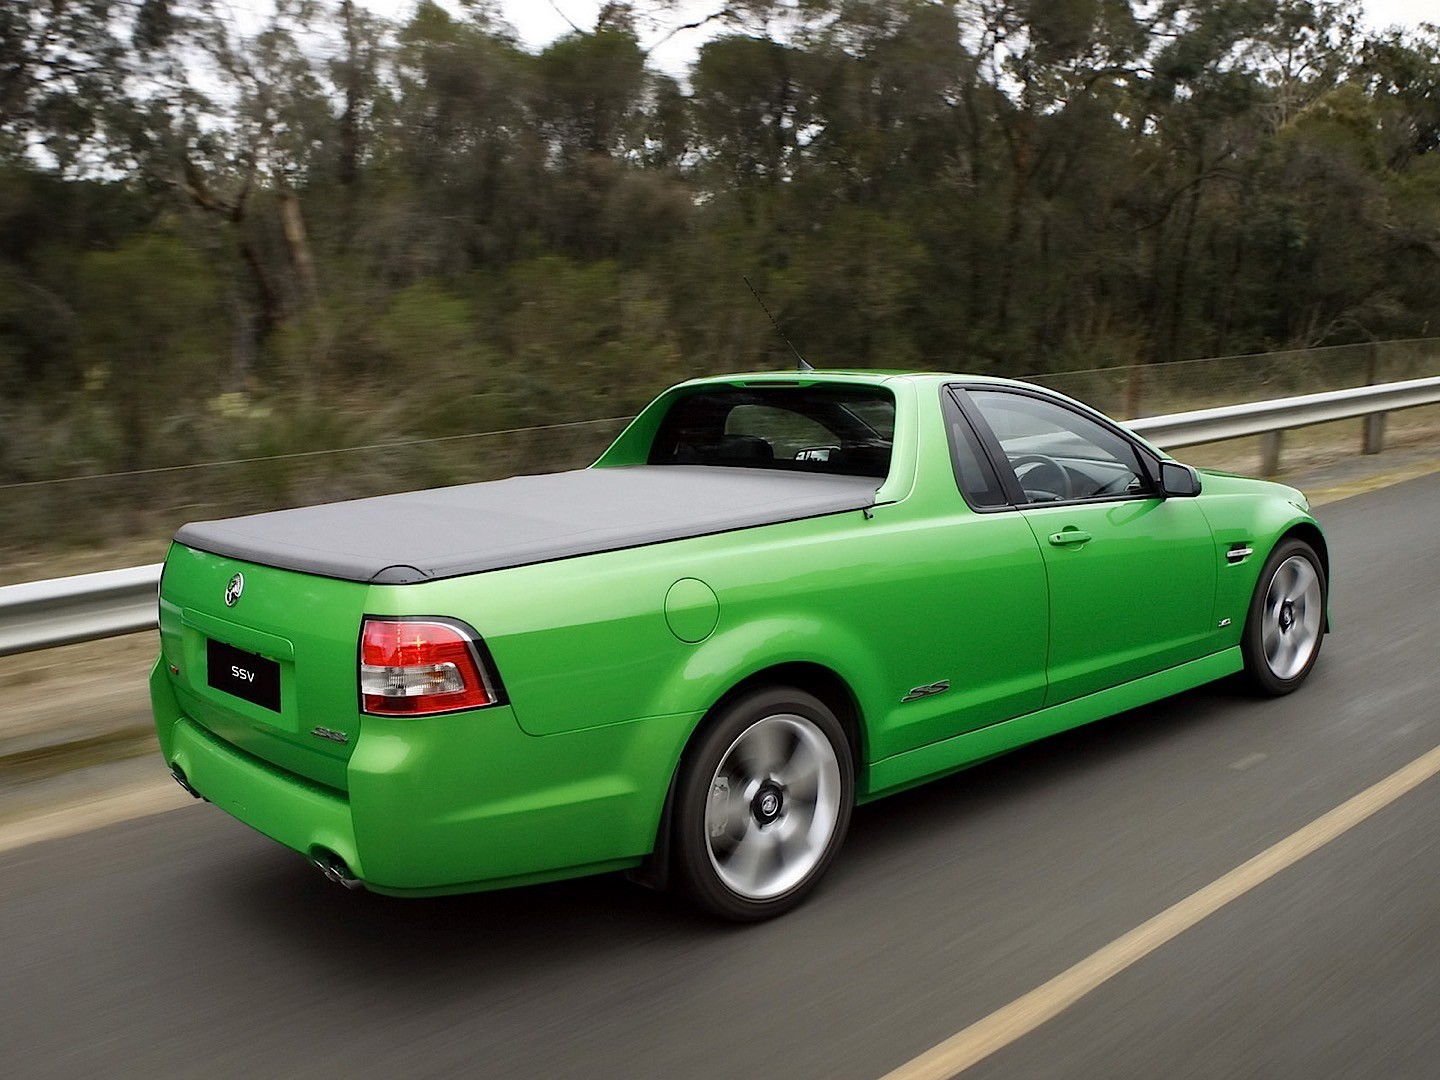 Images of Holden Ute | 1440x1080